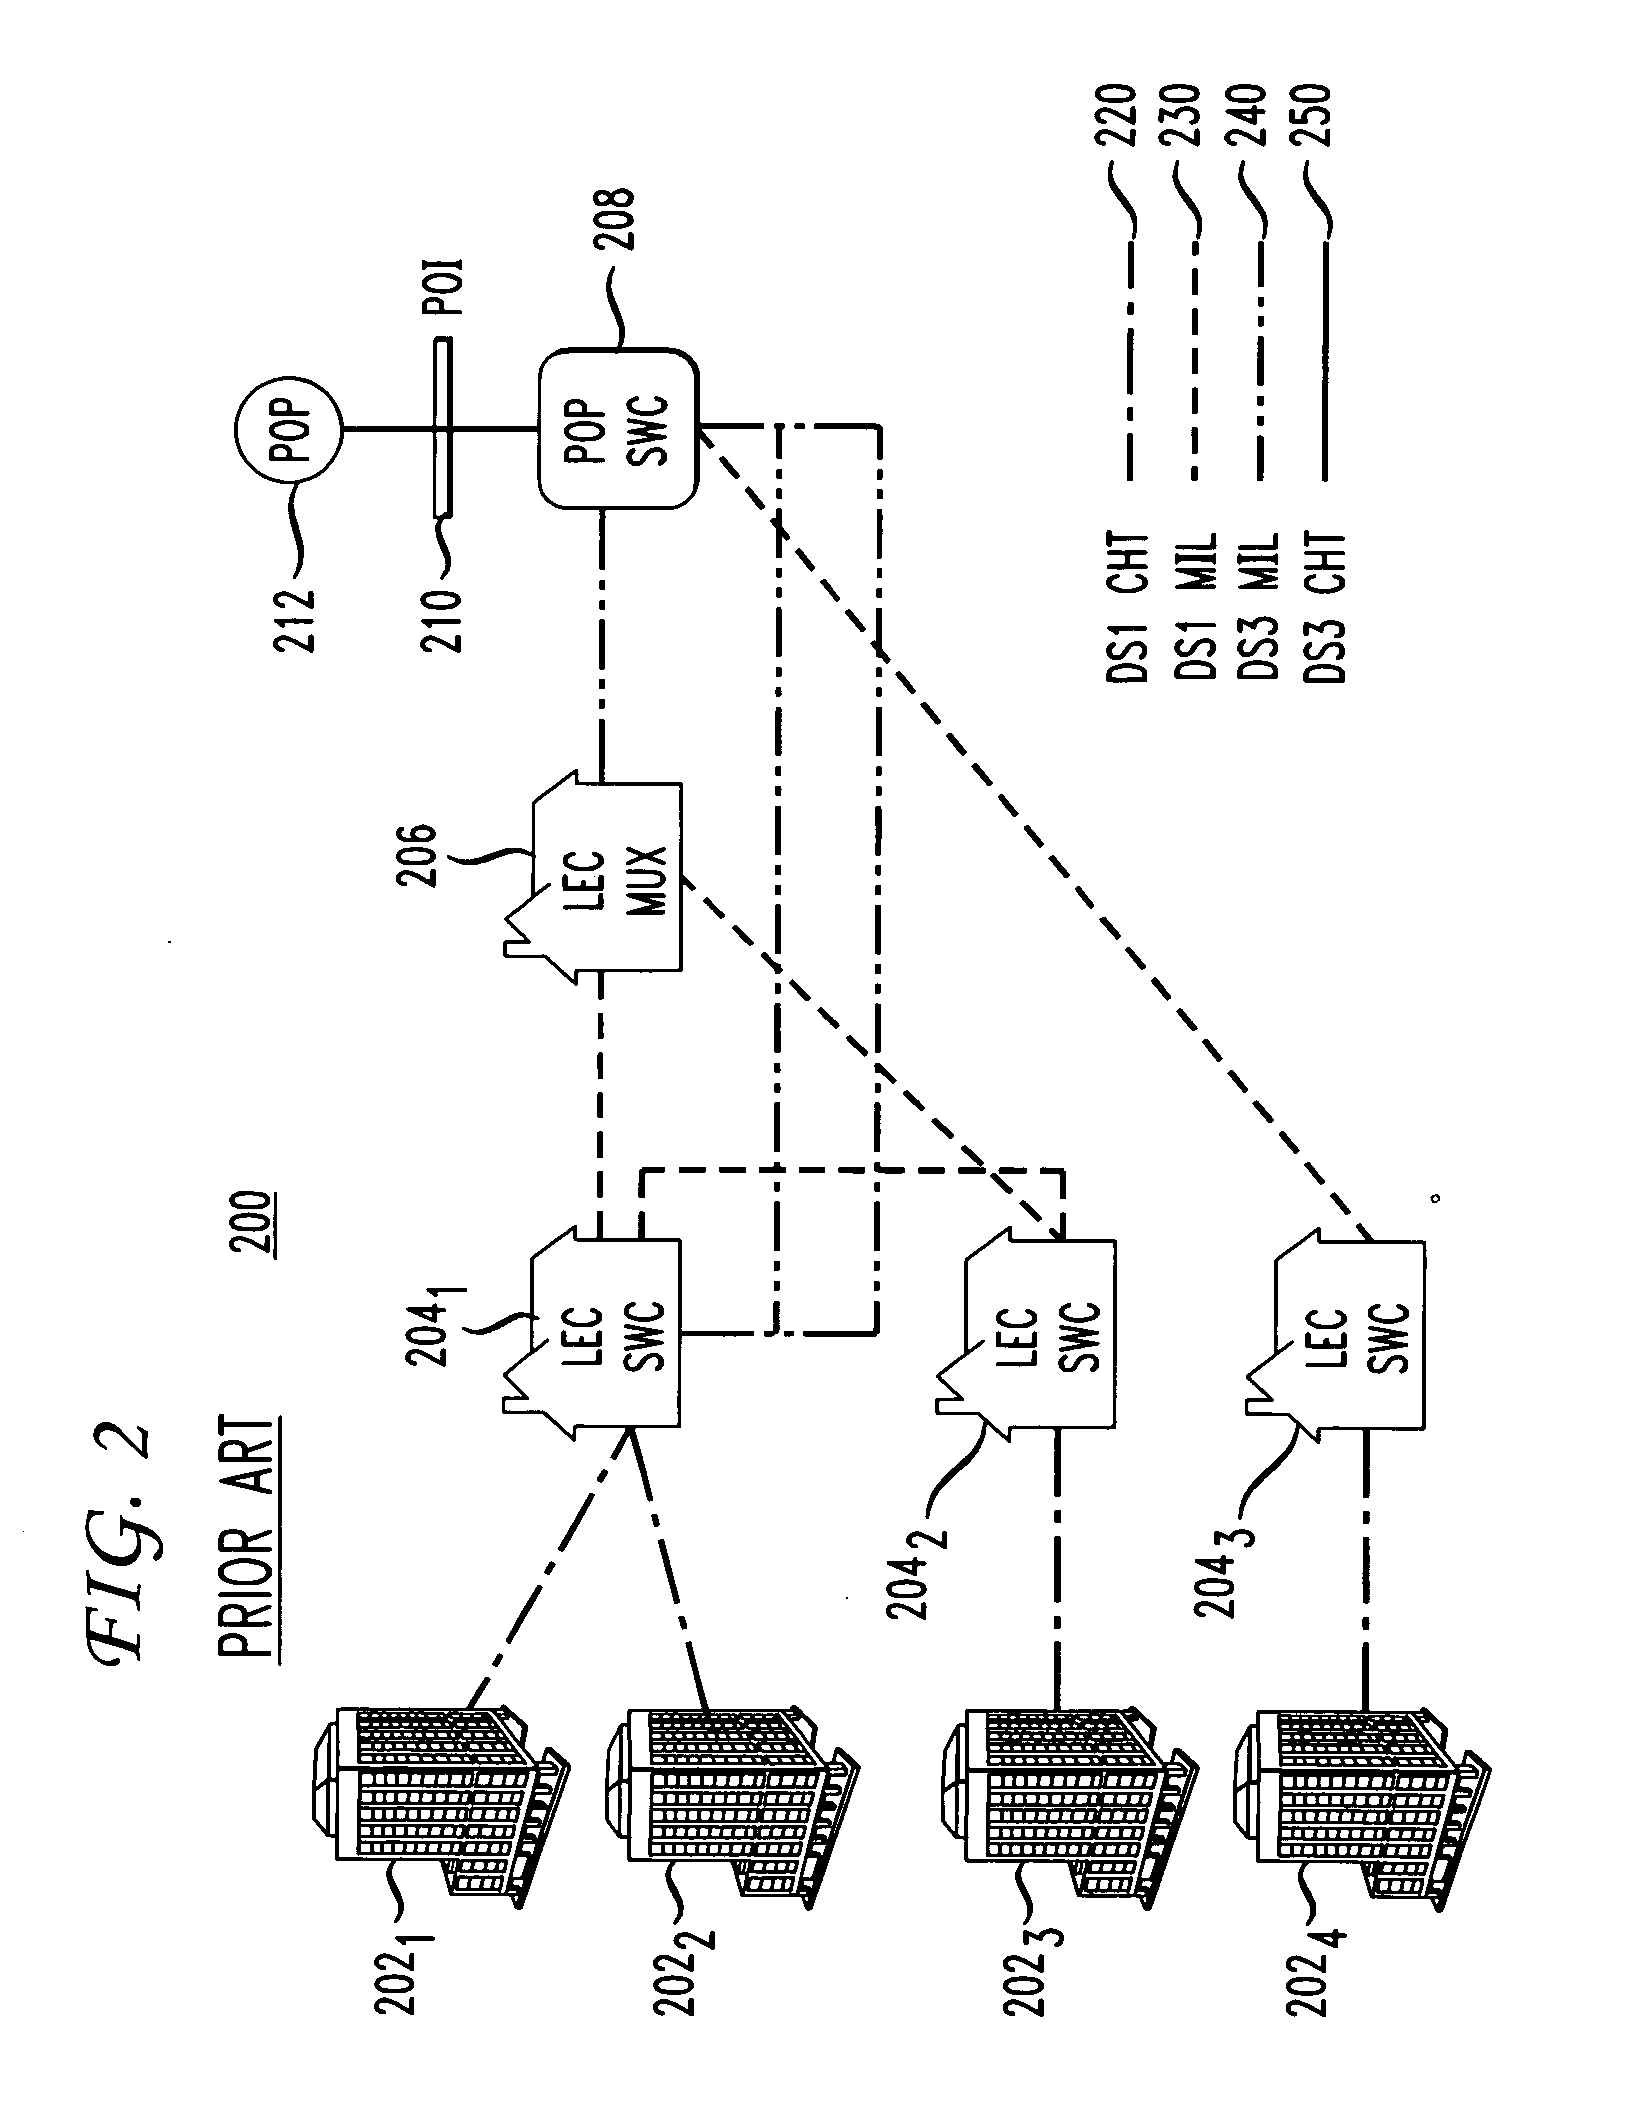 Method and apparatus for joint optimization of dedicatedand radio access networks